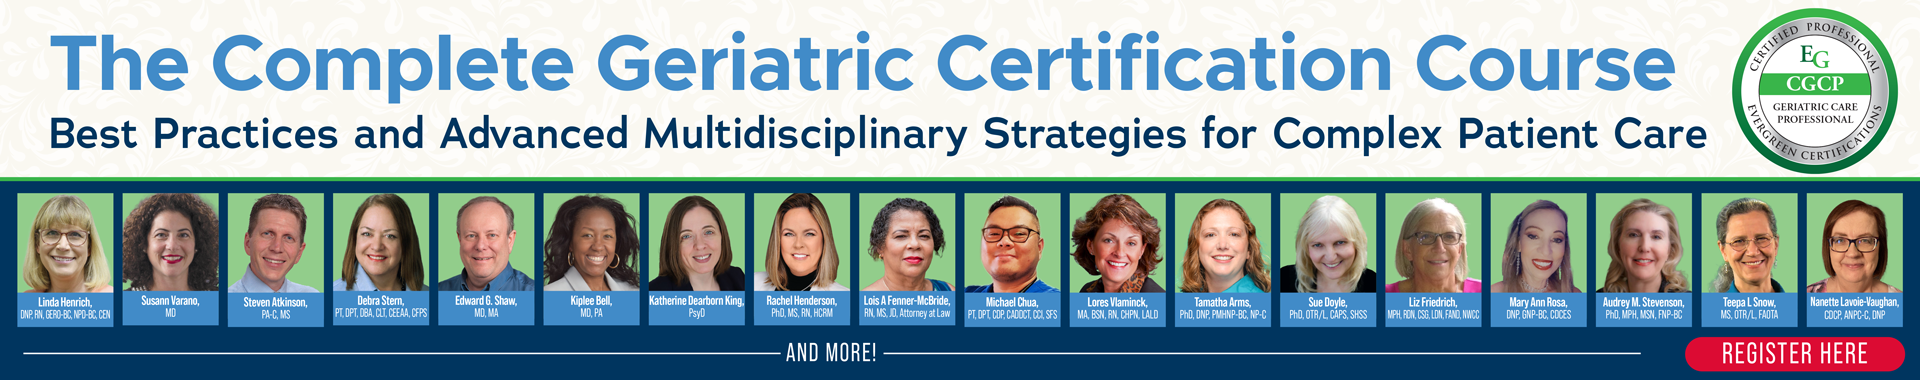 The Complete Geriatric Certification Course